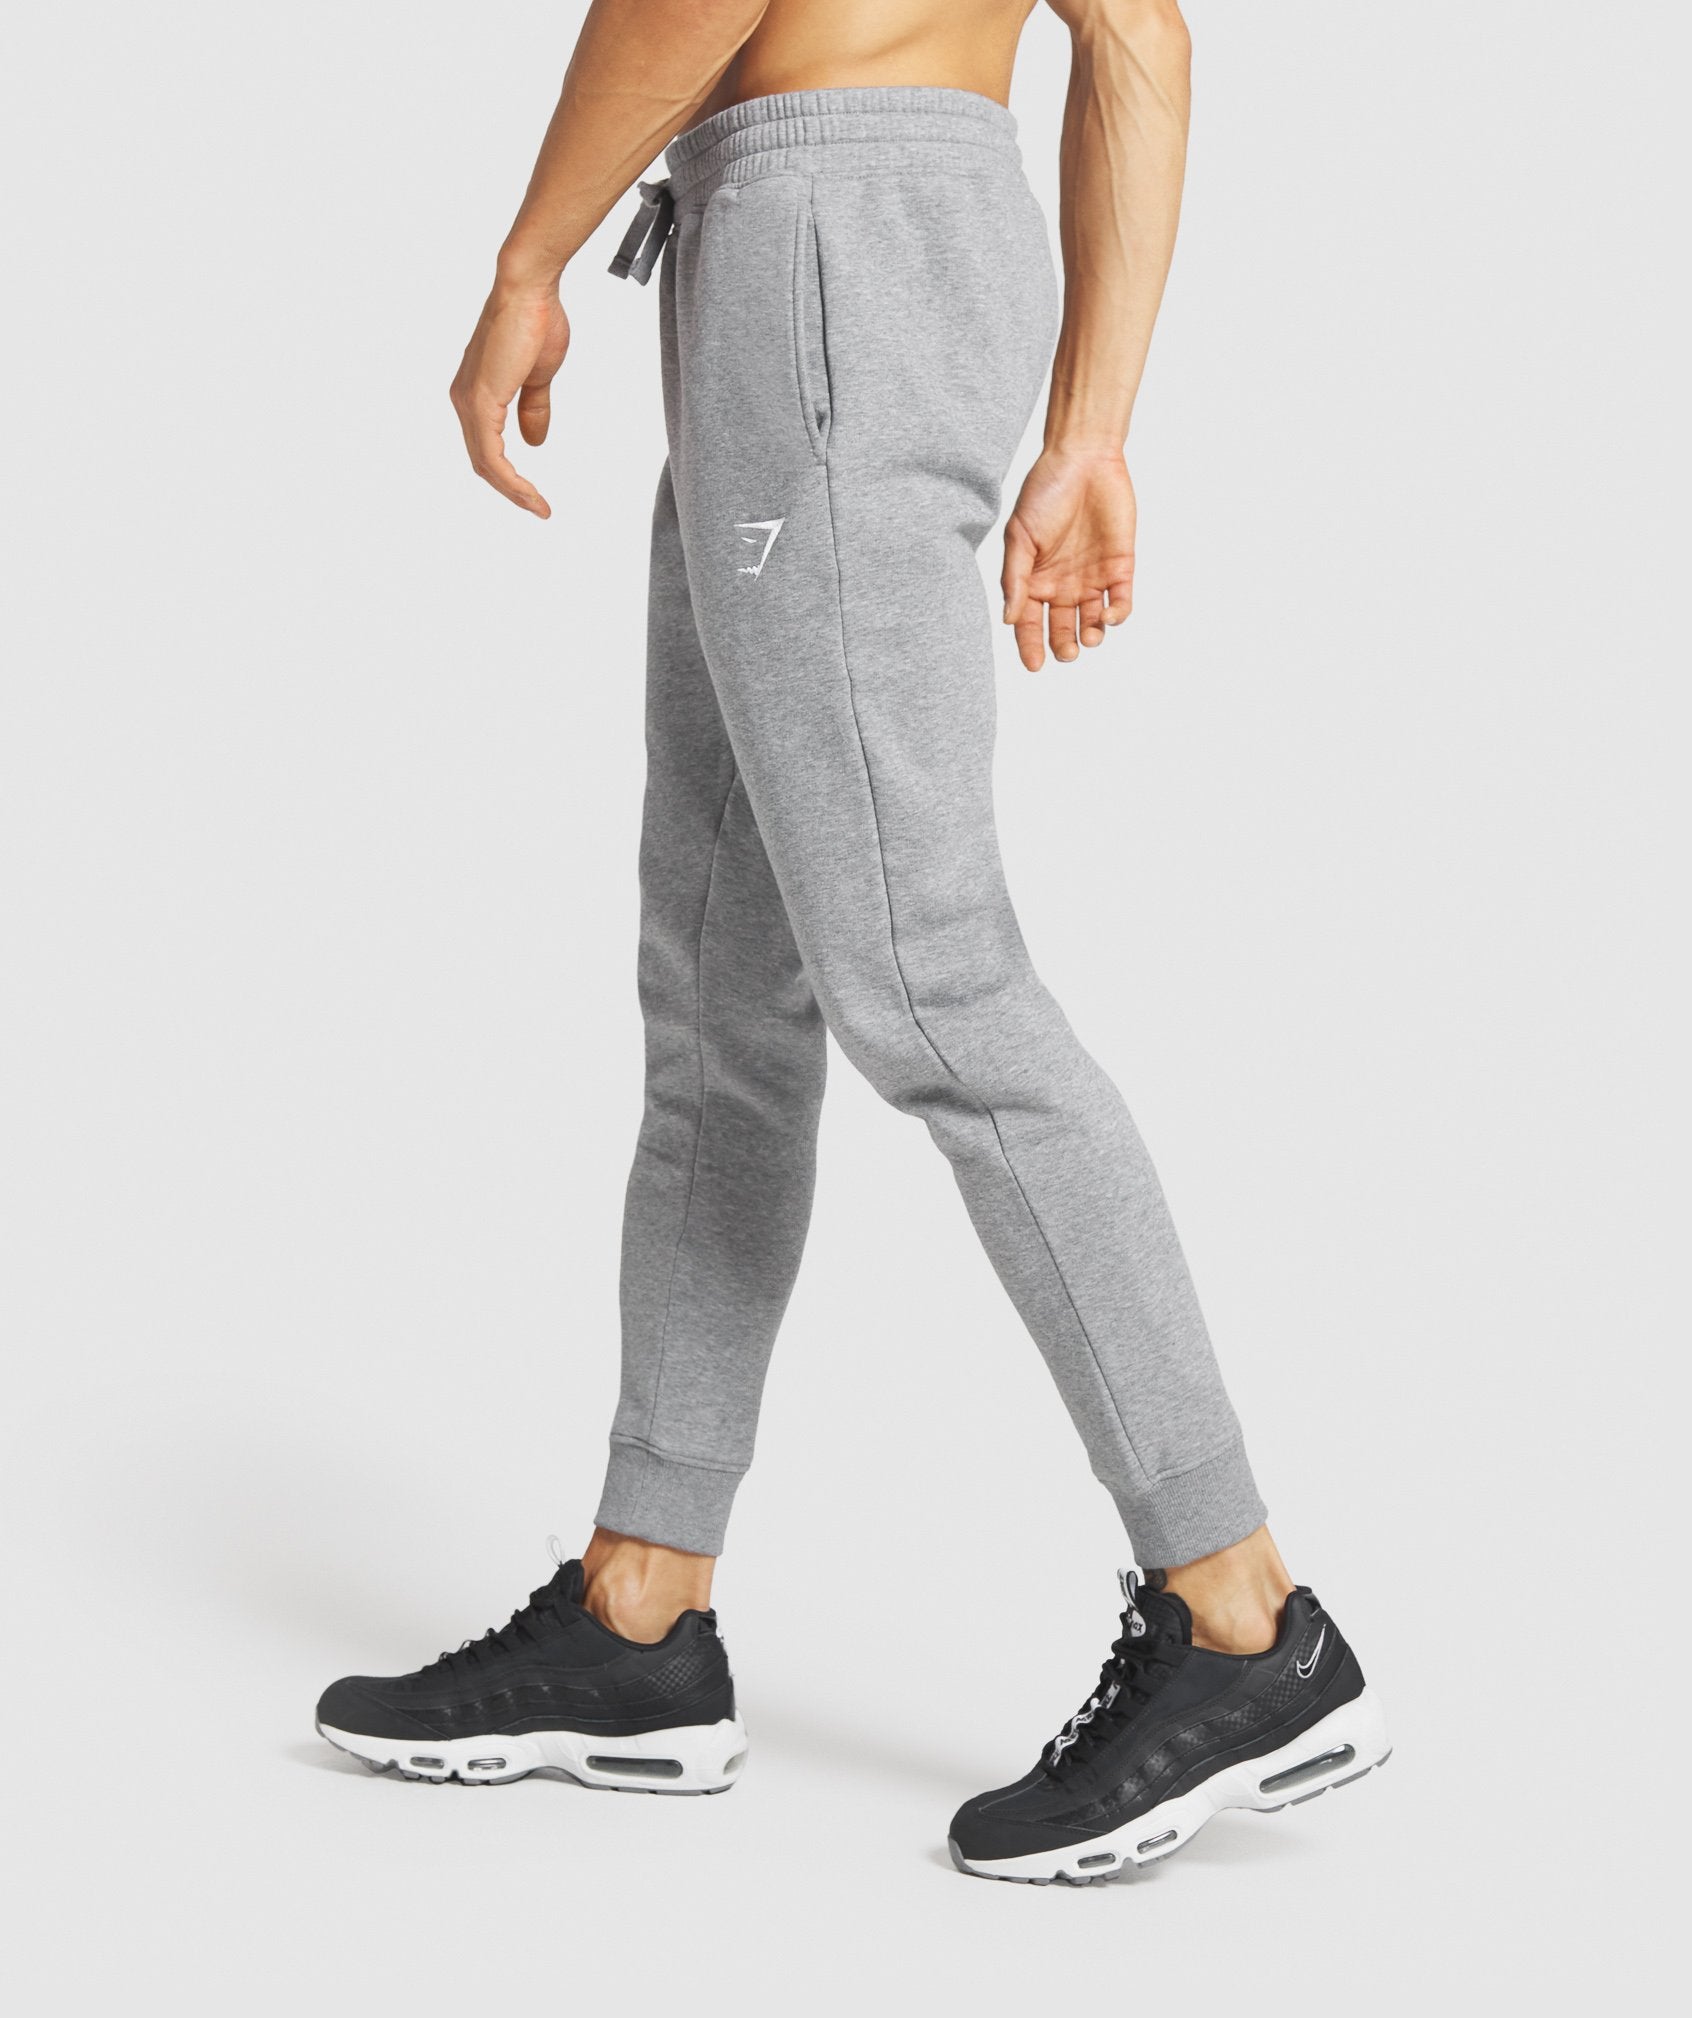 Crest Joggers in Charcoal Marl